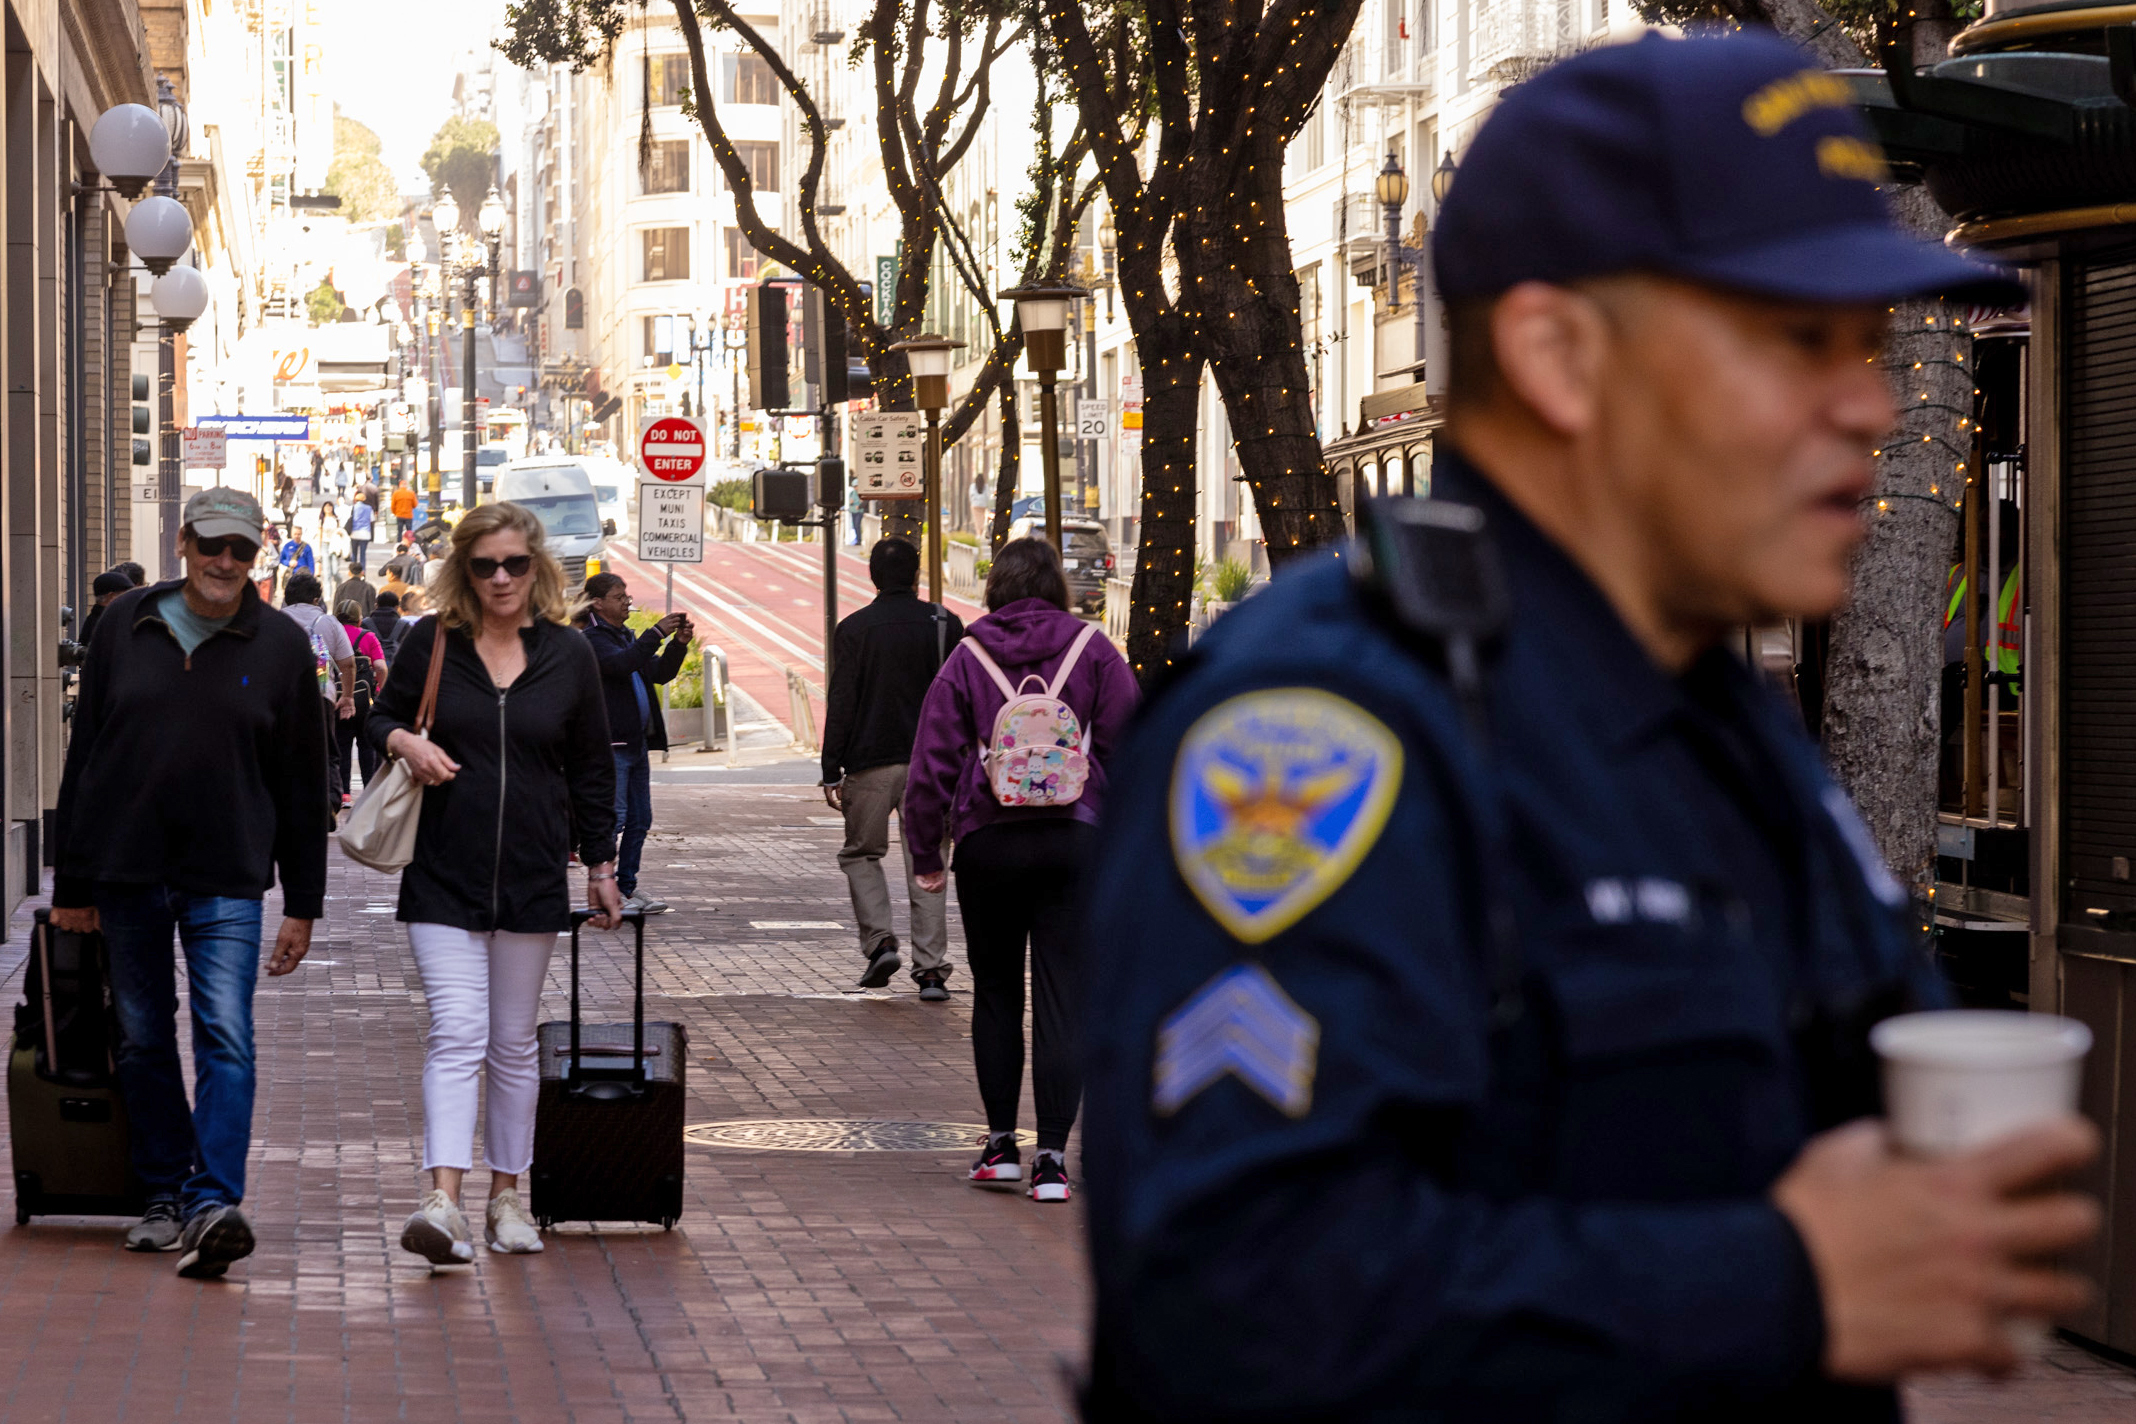 A busy city street with pedestrians and a police officer in the foreground.